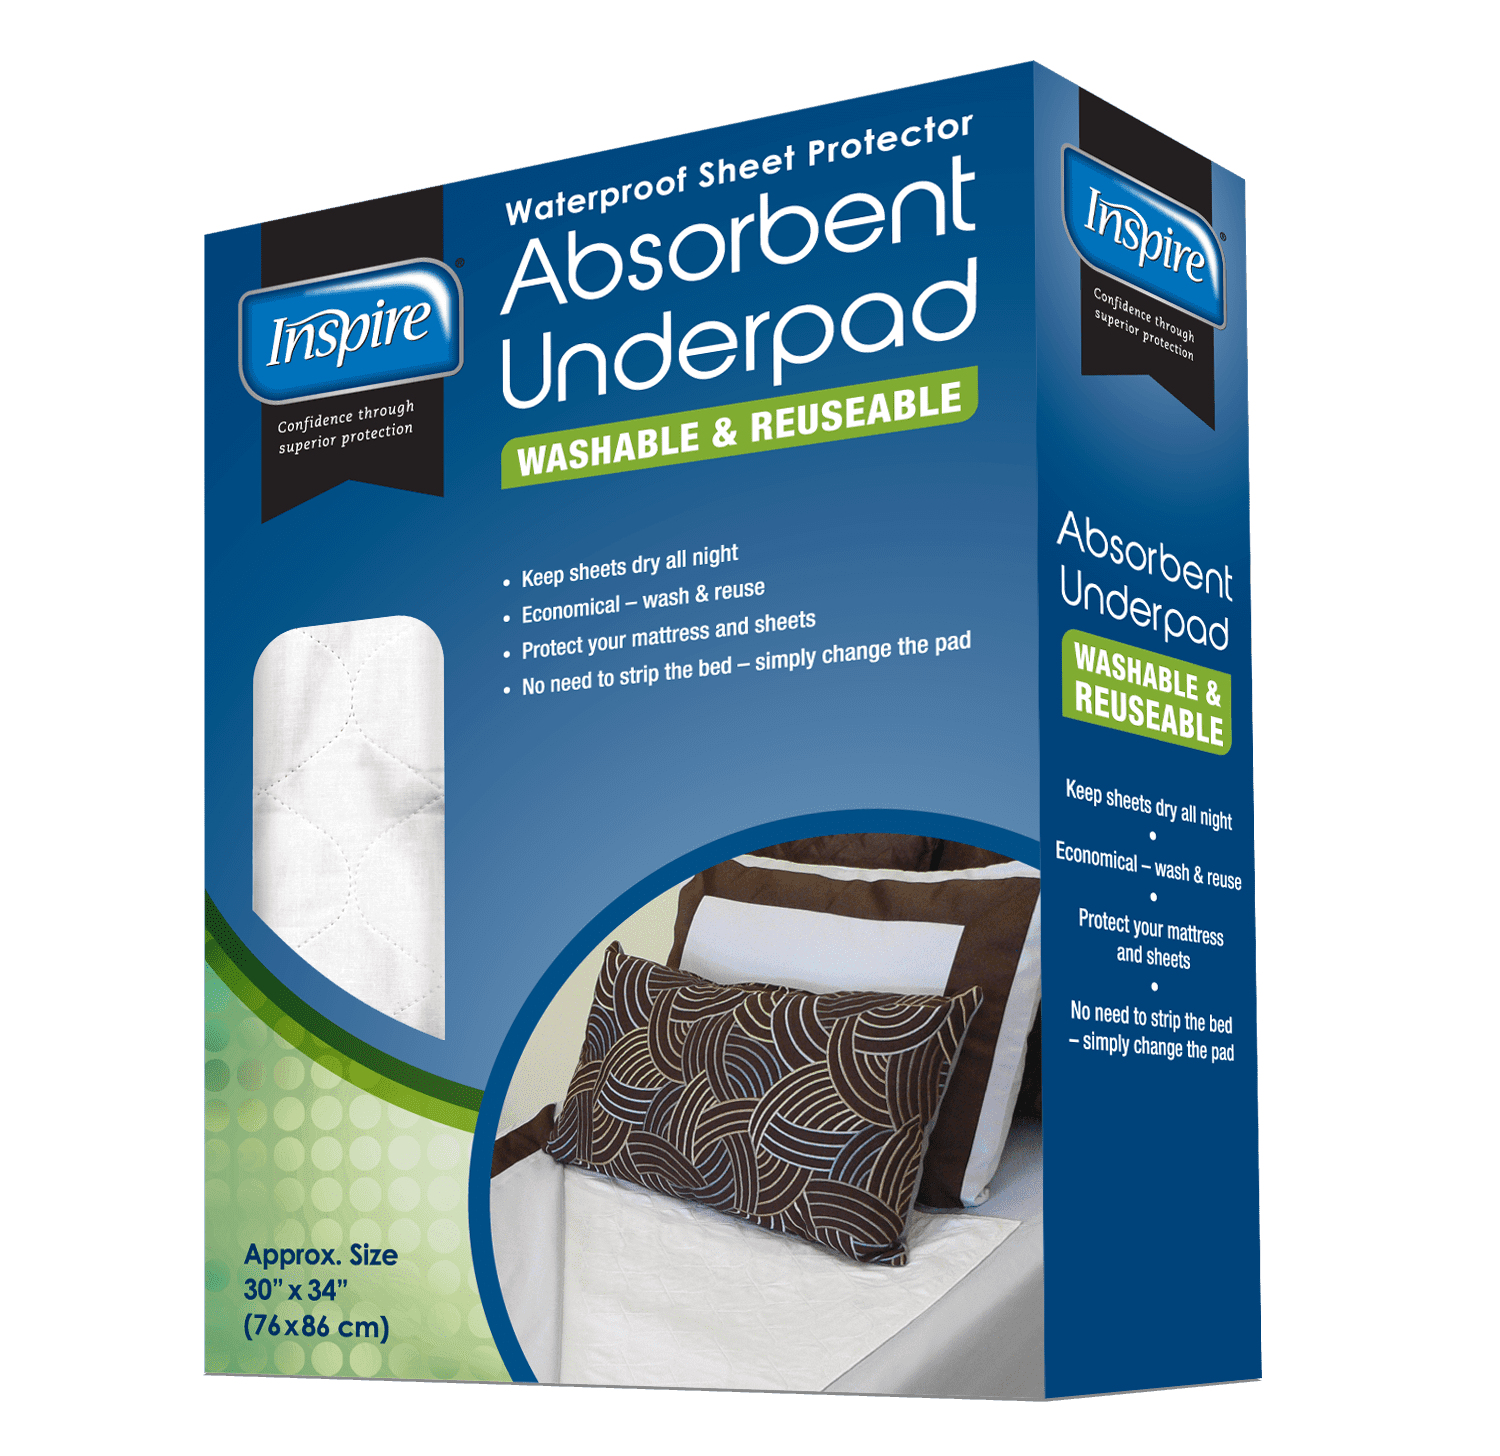  Dry Defender Incontinence Bed Pads Washable, 17 X 24 Washable  Underpads, Absorbent Waterproof Mattress Pads For Bed, Reusable  Incontinence Pads For Kids & Adult Underpads, Bedwetting, Pack Of 6